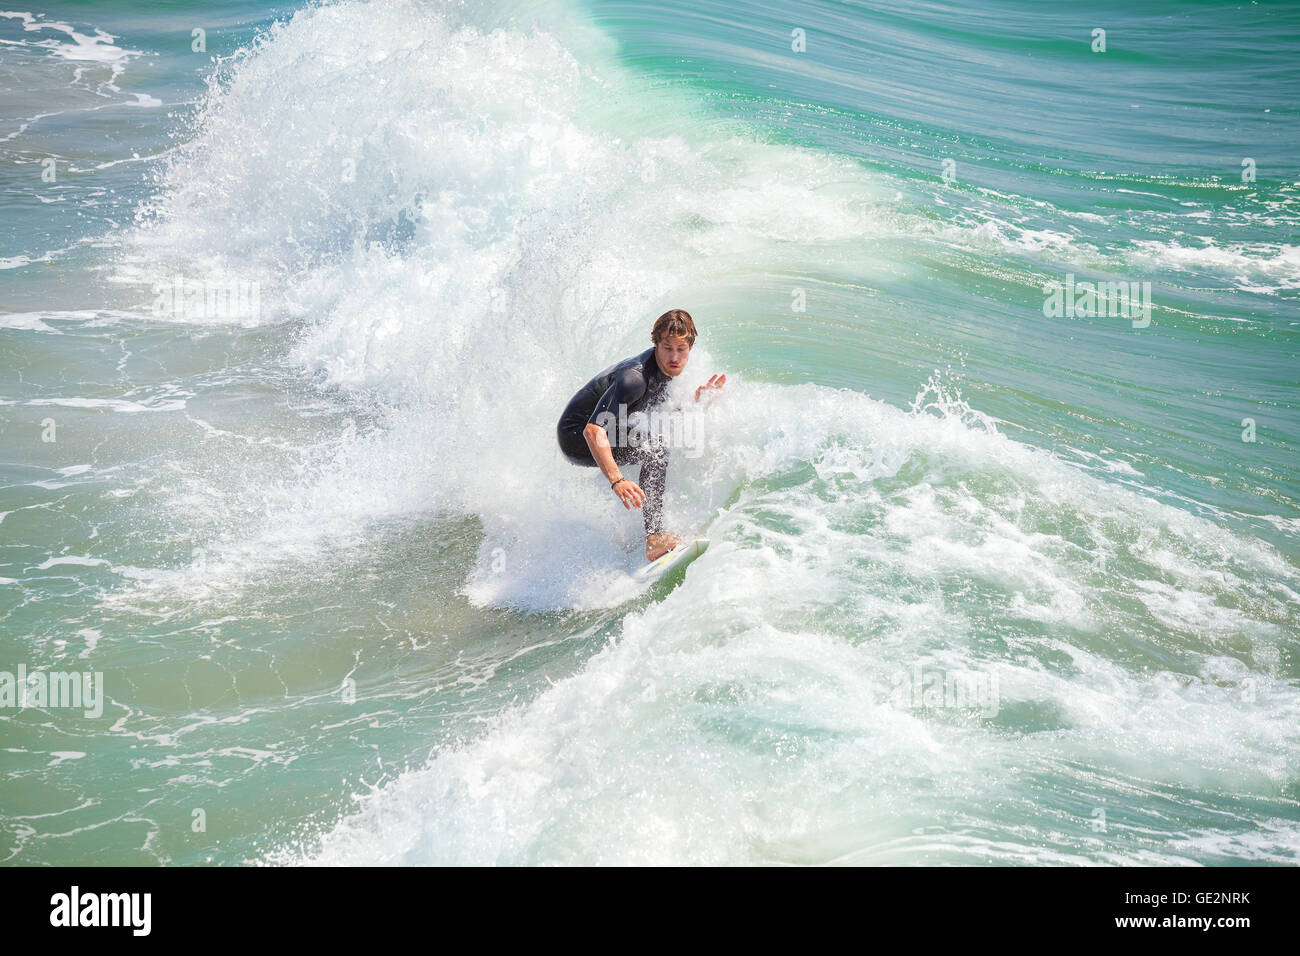 Venice Beach, Los Angeles, USA - August 22, 2015: Surfer riding wave on a beautiful sunny day. Stock Photo